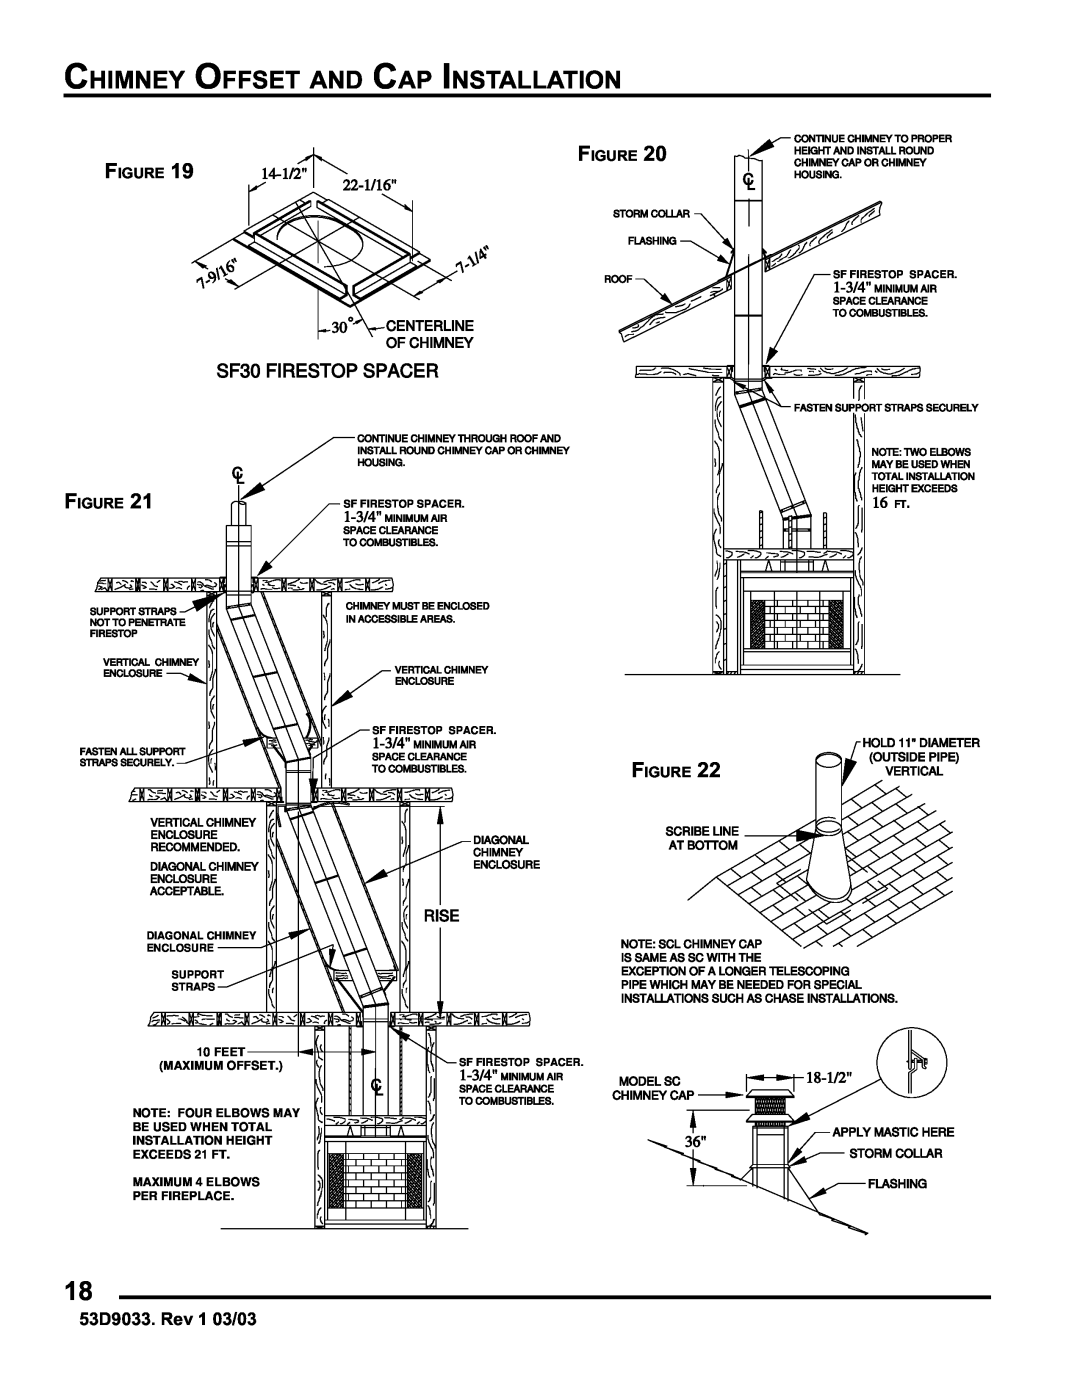 Monessen Hearth SWB400I Chimney Offset And Cap Installation, SF30 FIRESTOP SPACER, 14-1/2, 22-1/16, Rise, 16 FT, 9/16 